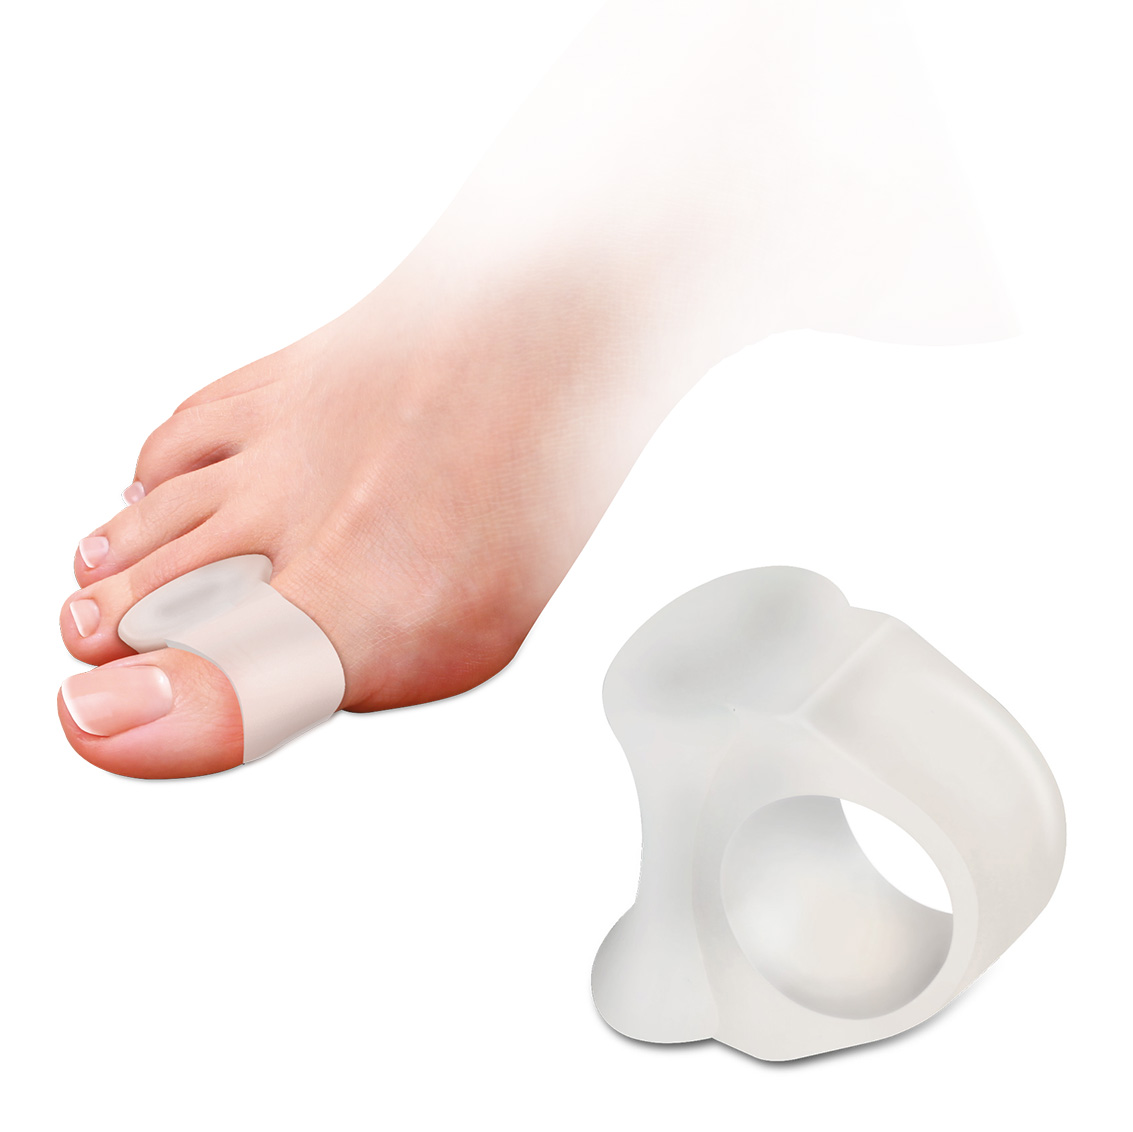 Toe spreader with ring